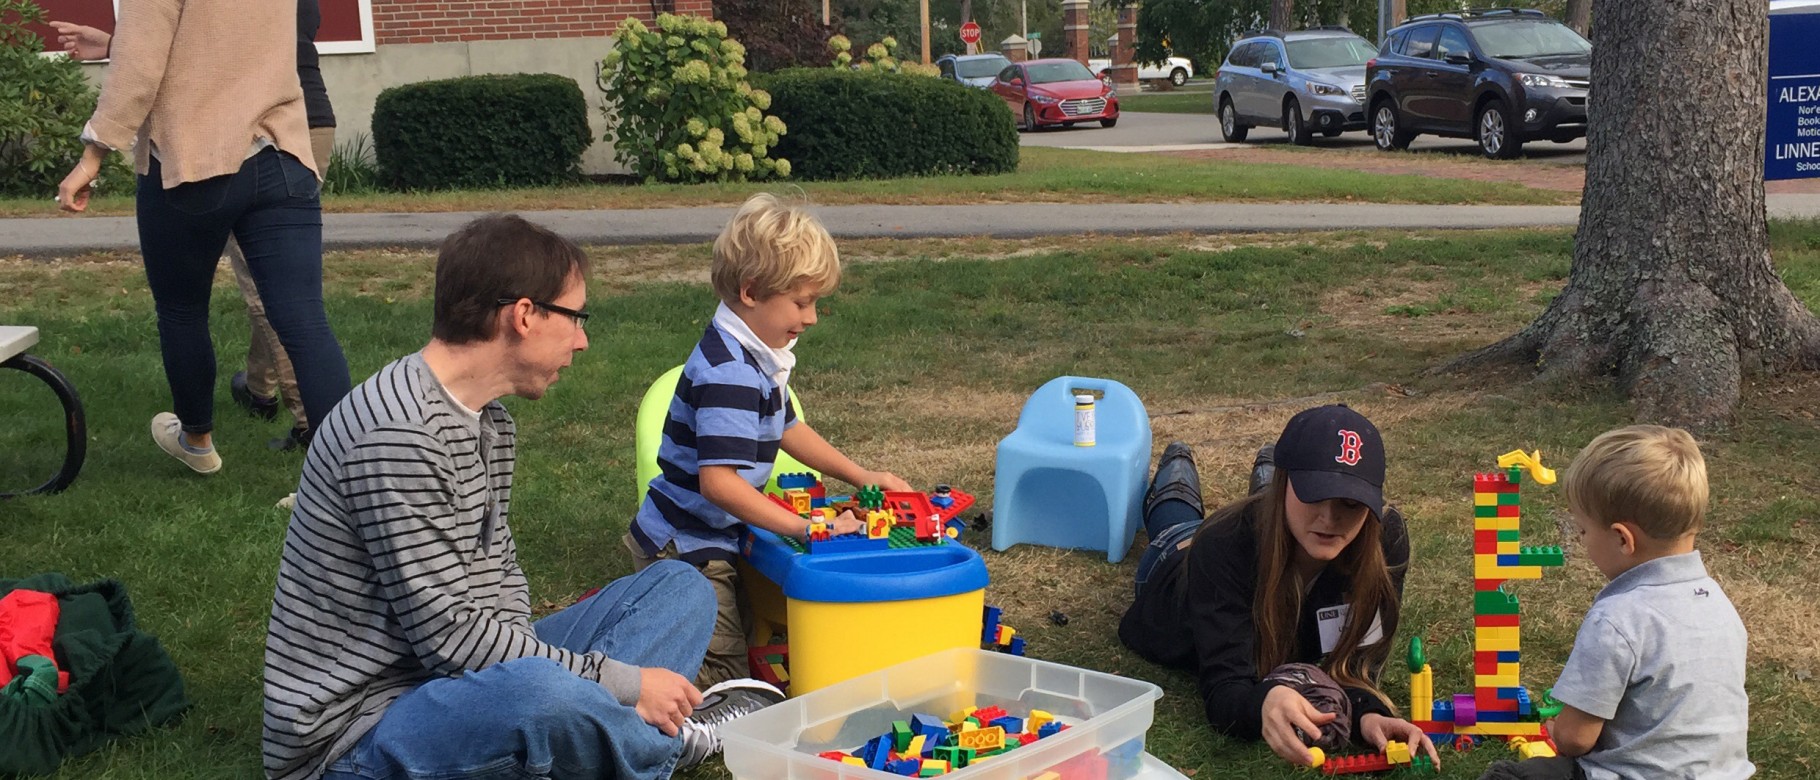 LEND Trainee Matt Pascarella and Lindsey Rose, PT, D.P.T., interact with children at the annual picnic.